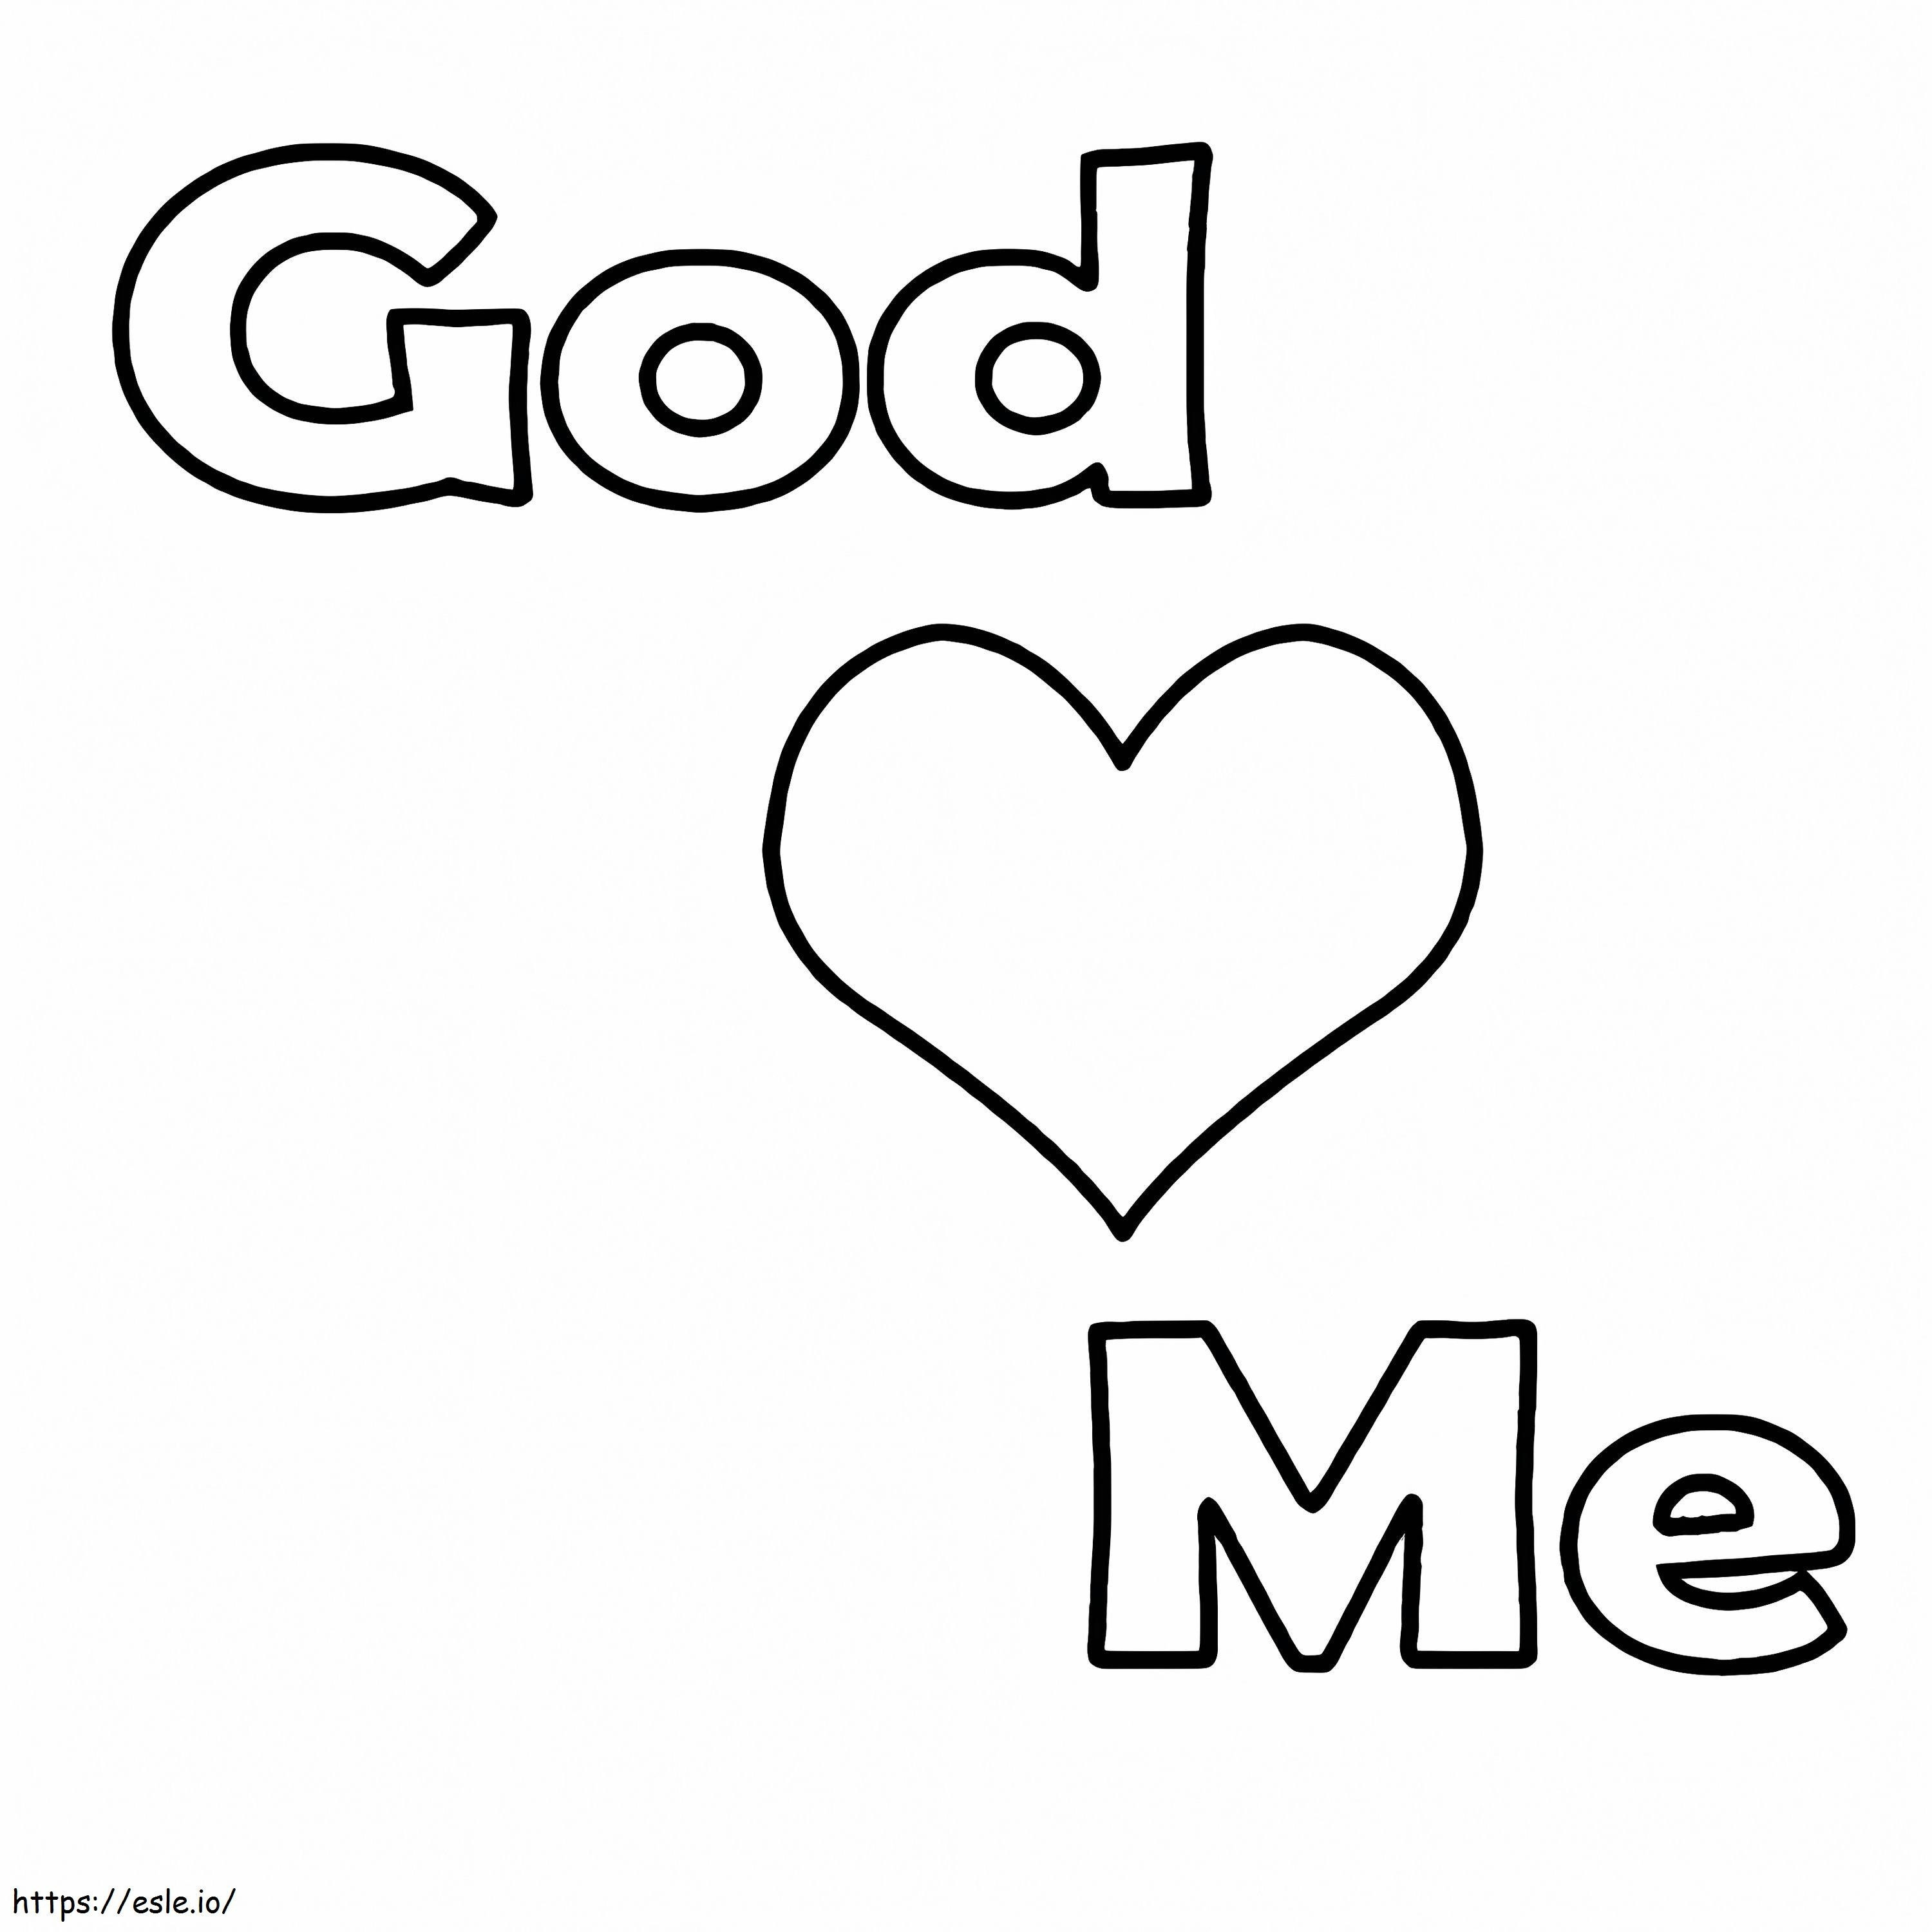 God Loves Me 8 coloring page